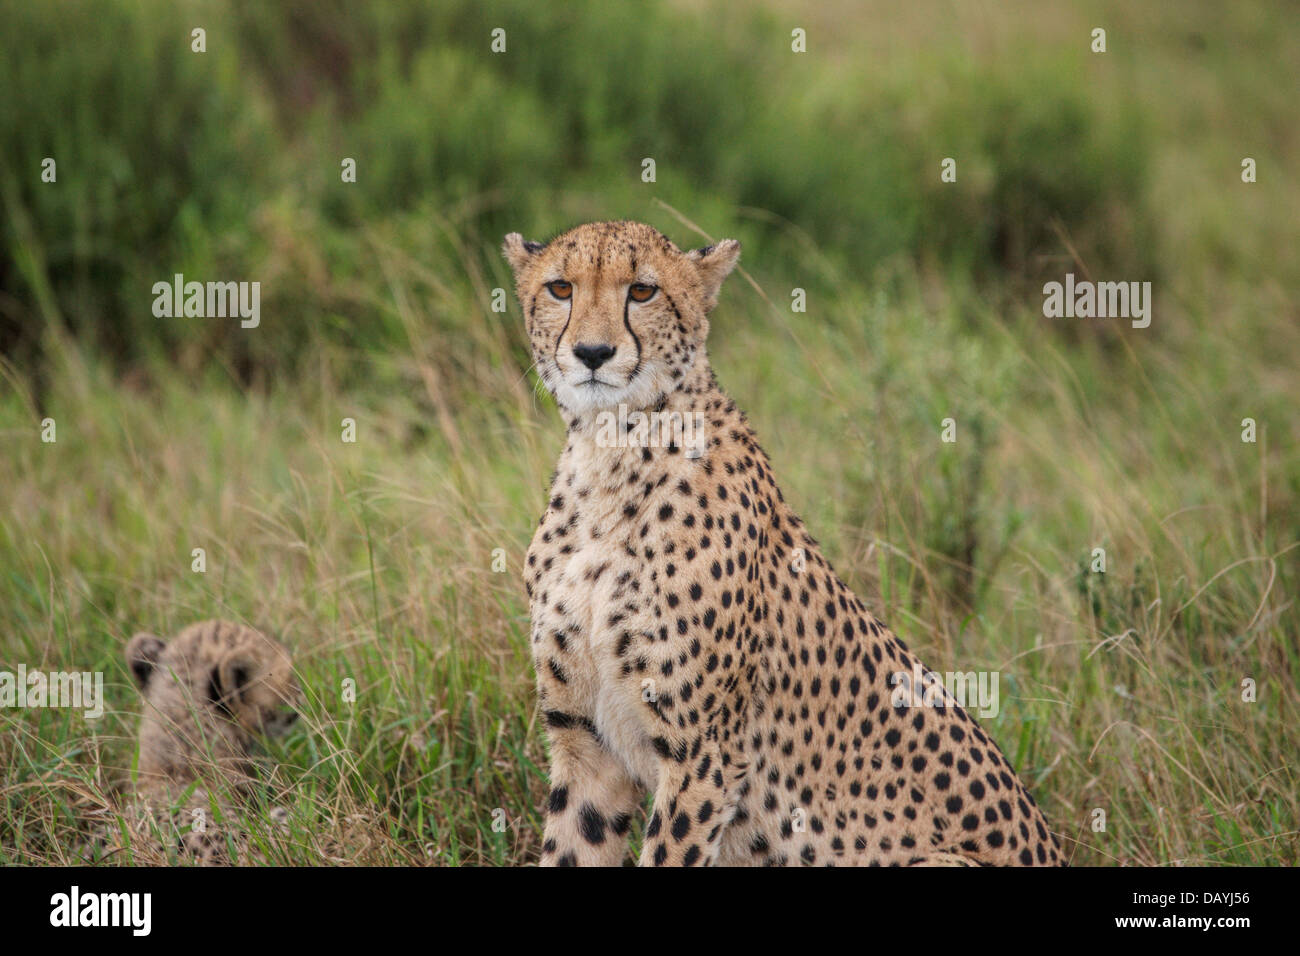 Cheetah - mother and baby - South Africa Stock Photo